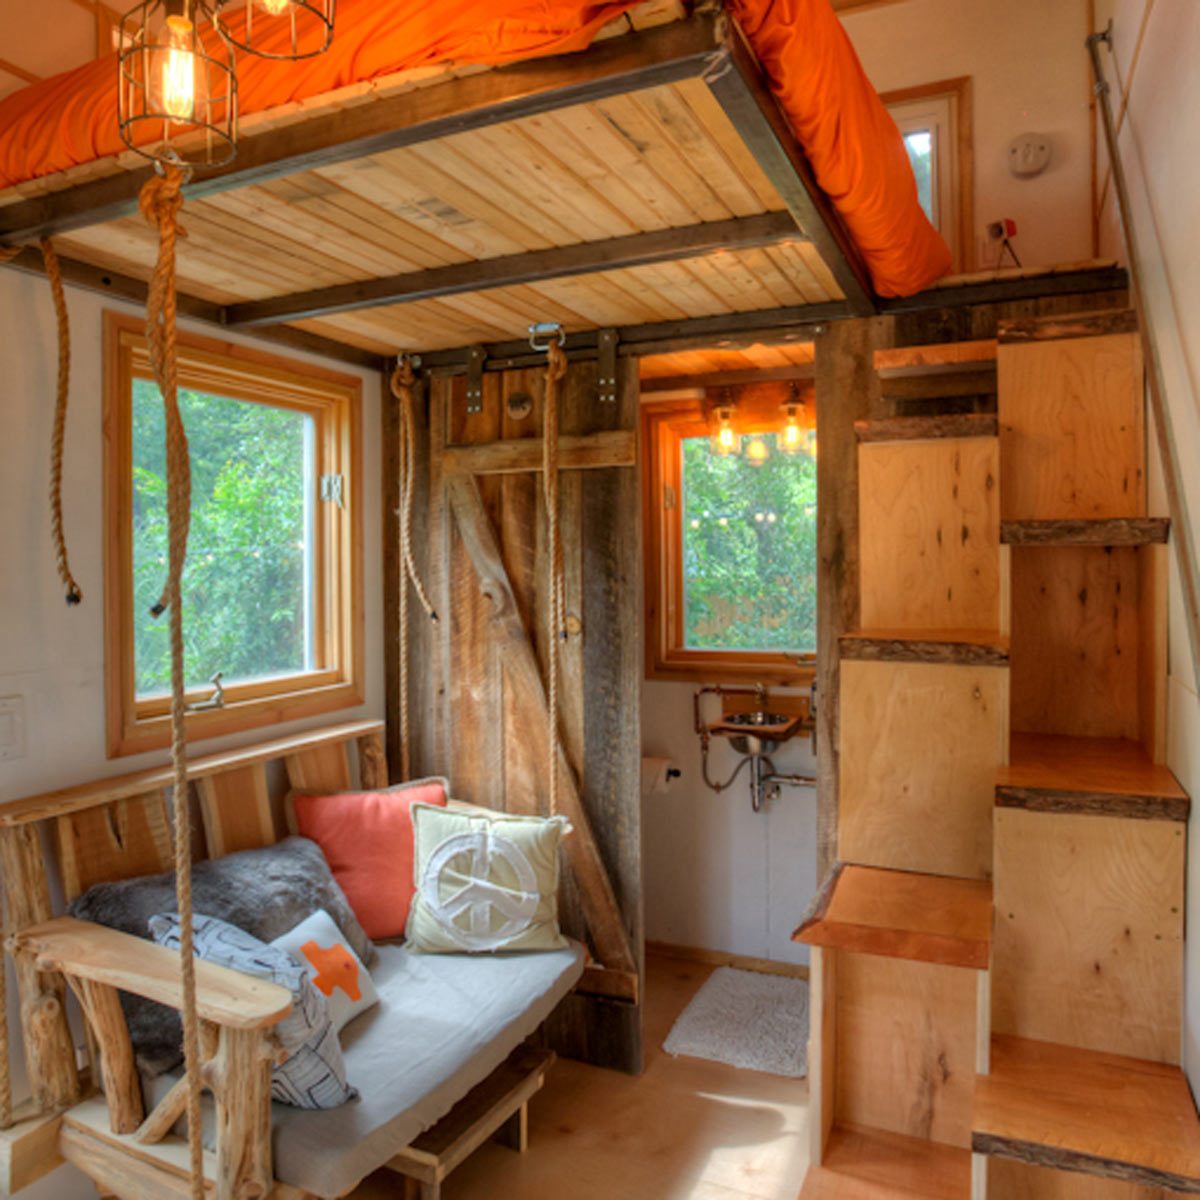 <p>With a tiny home, there is no other room to retreat to when partners have disputes and want to cool off. So give living in close quarters a few test runs to <a href="http://thetinylife.com/five-things-to-do-before-you-build-your-tiny-house/" rel="nofollow">see how it feels</a>. The test runs won’t cover <a href="https://www.familyhandyman.com/list/20-genius-camping-gear-items-you-can-find-at-harbor-freight/">every situation that might arise</a> but it will help couples envision what life in a tiny home looks like.</p>